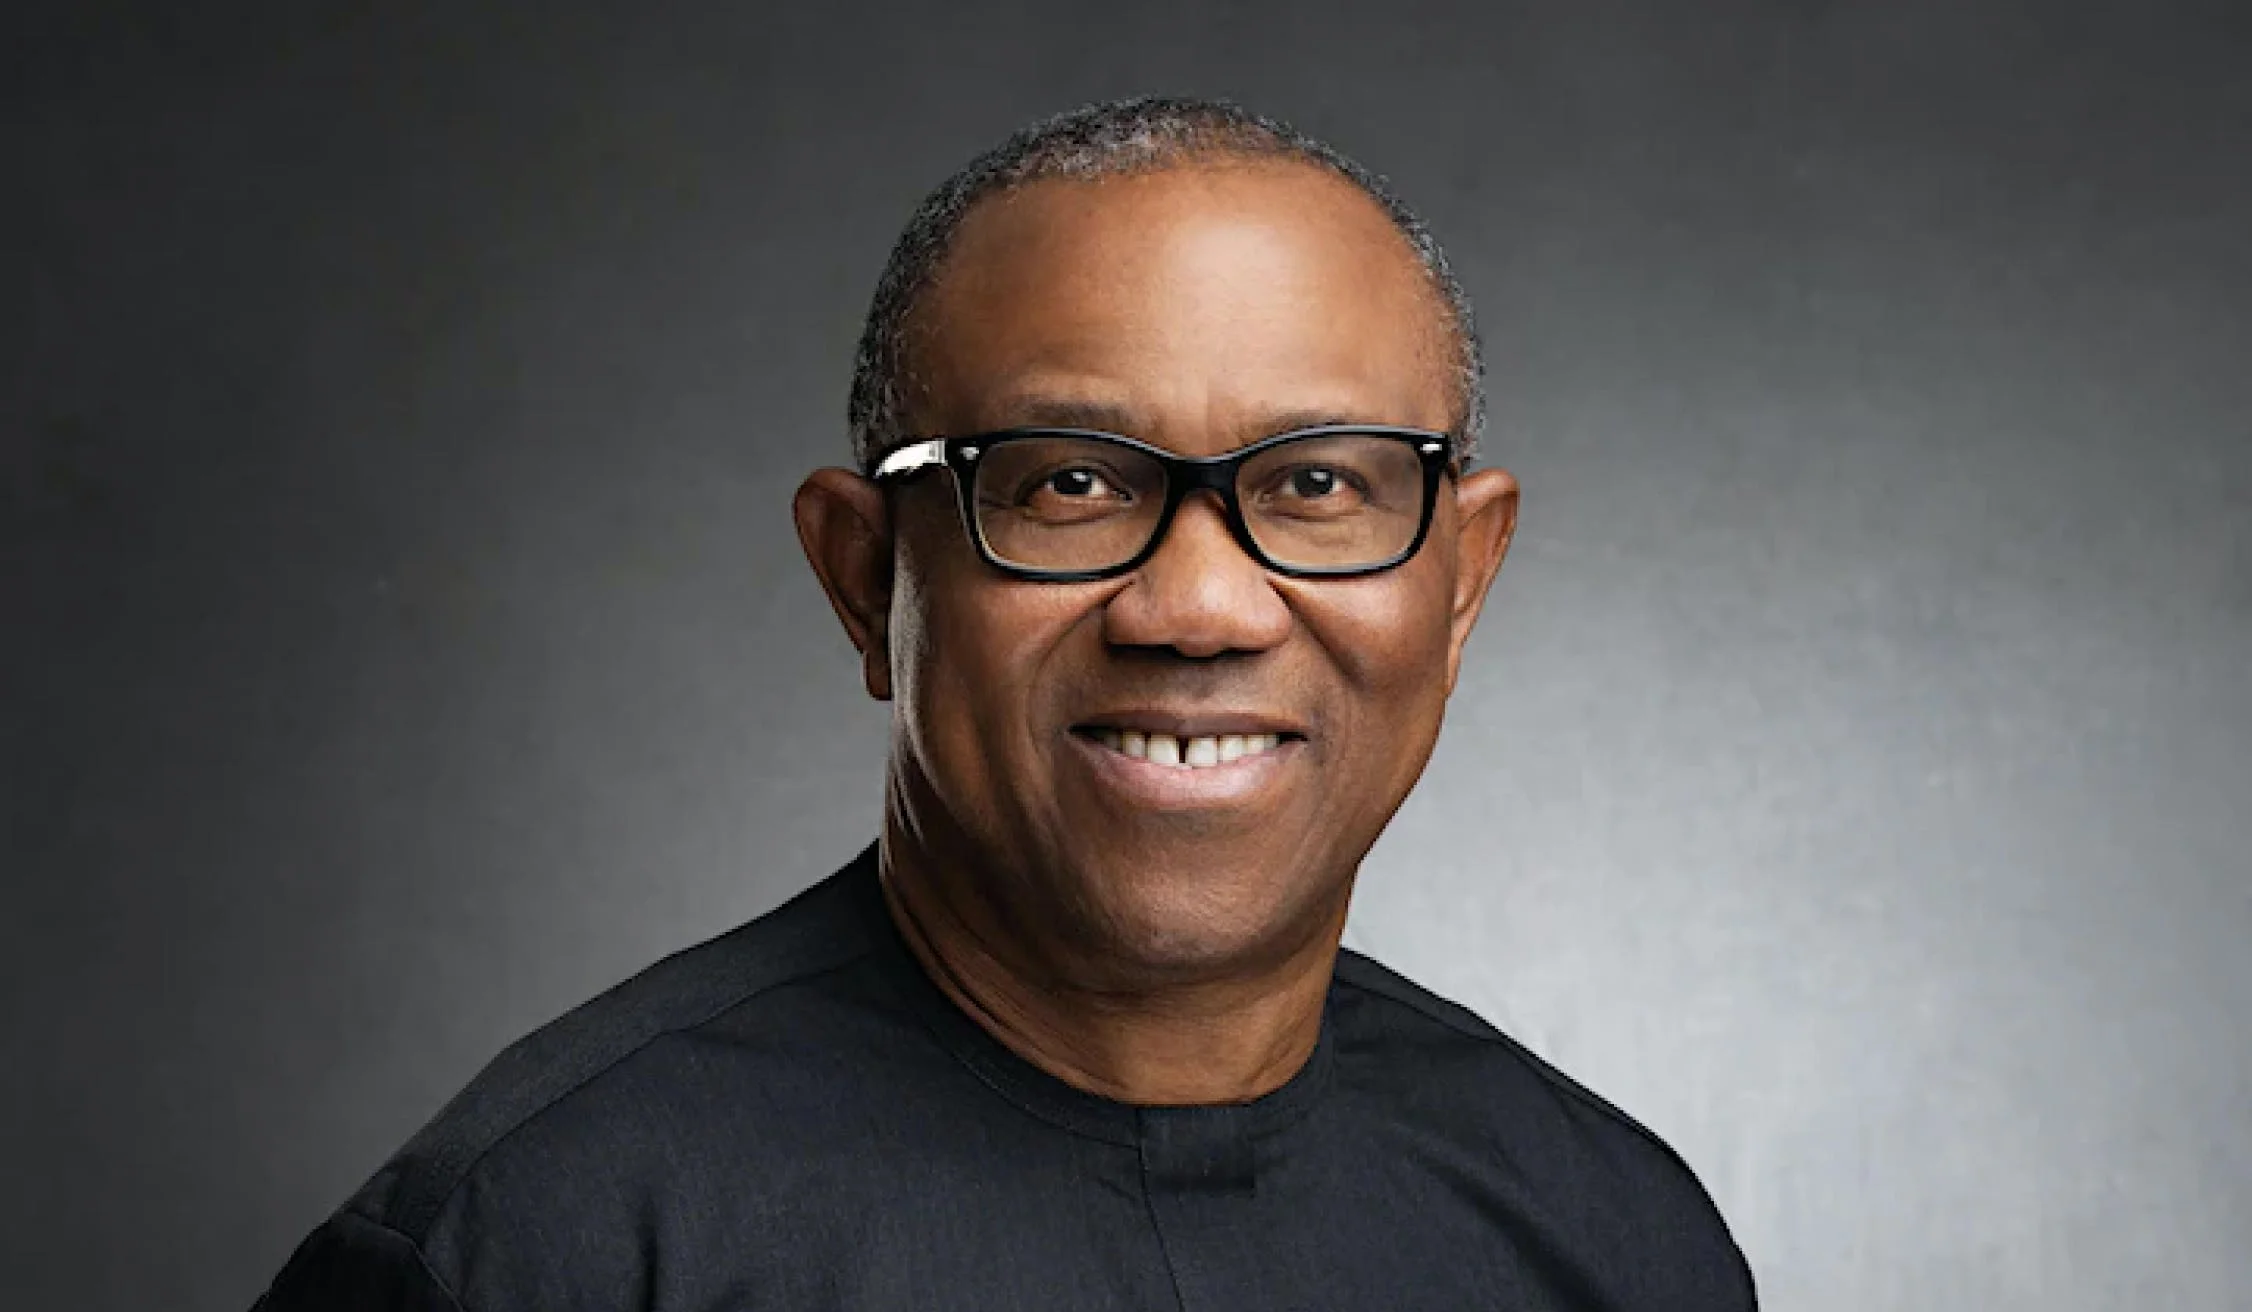 ‘We are all prisoners’ – Peter Obi says as he celebrates Easter with inmates